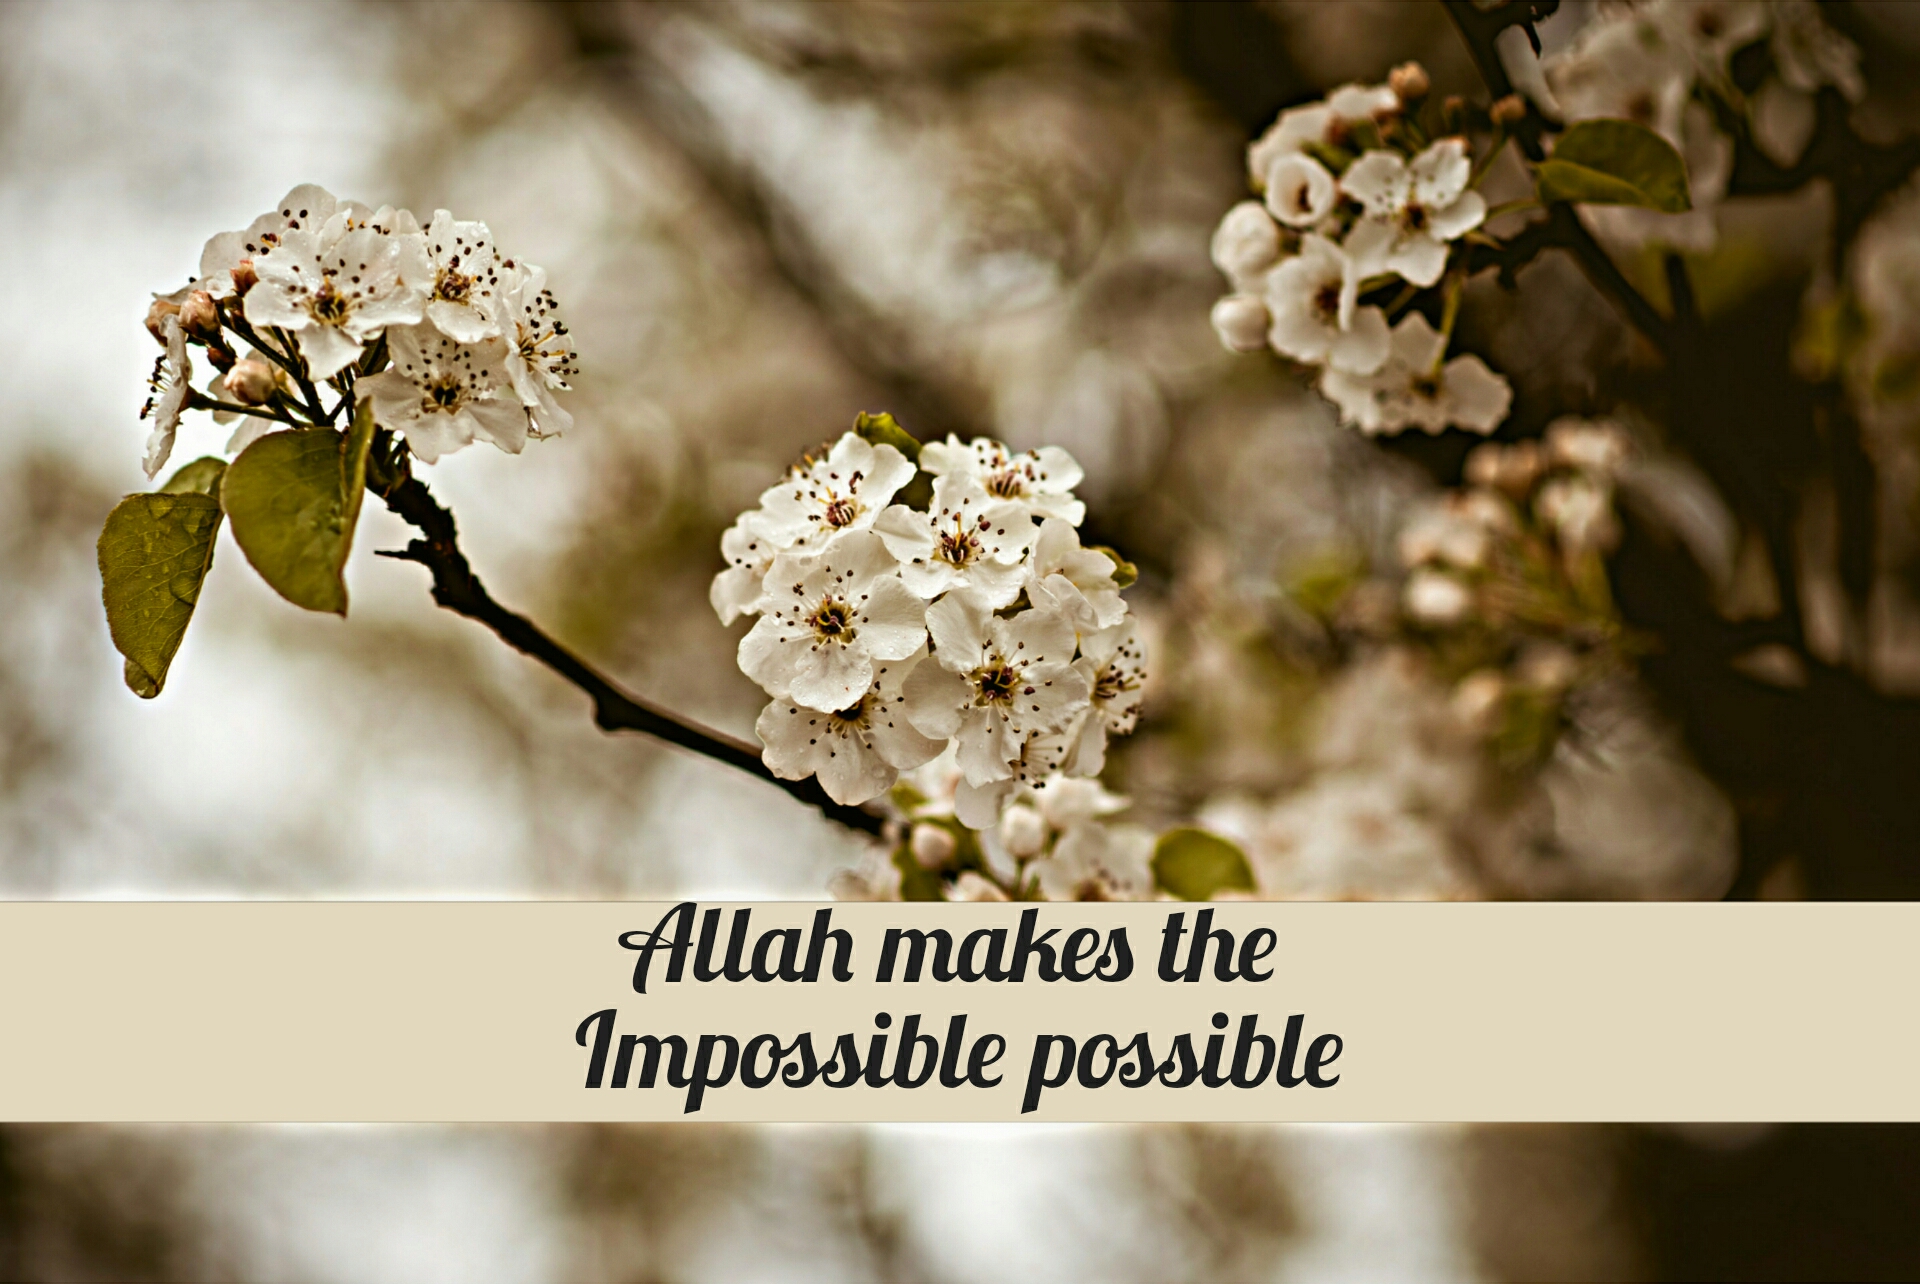 Allah-makes-the-impossible-possible.jpg